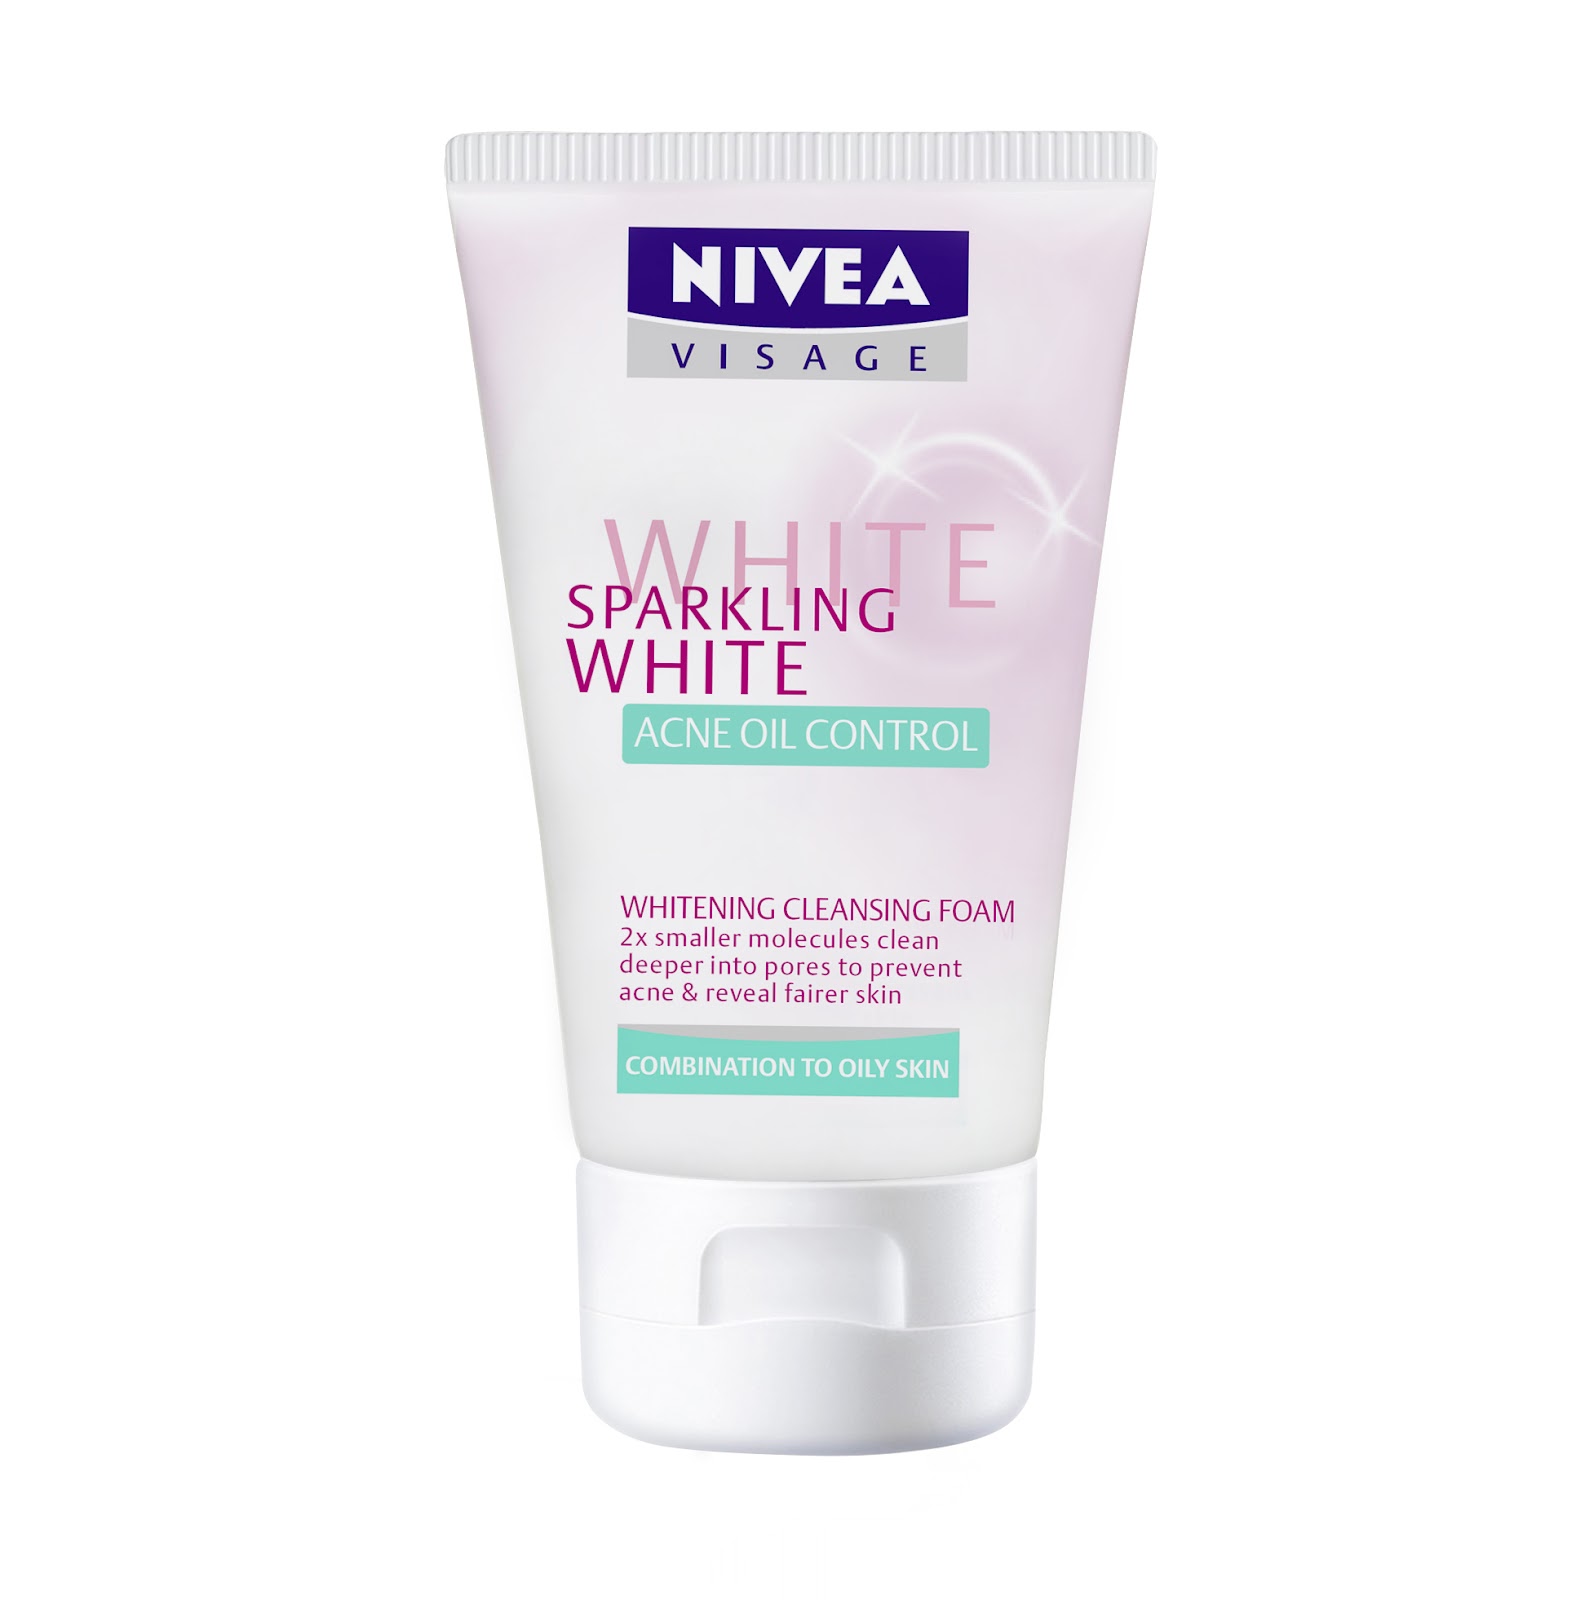 NIVEA Sparkling White Acne Oil Control Whitening Cleansing 